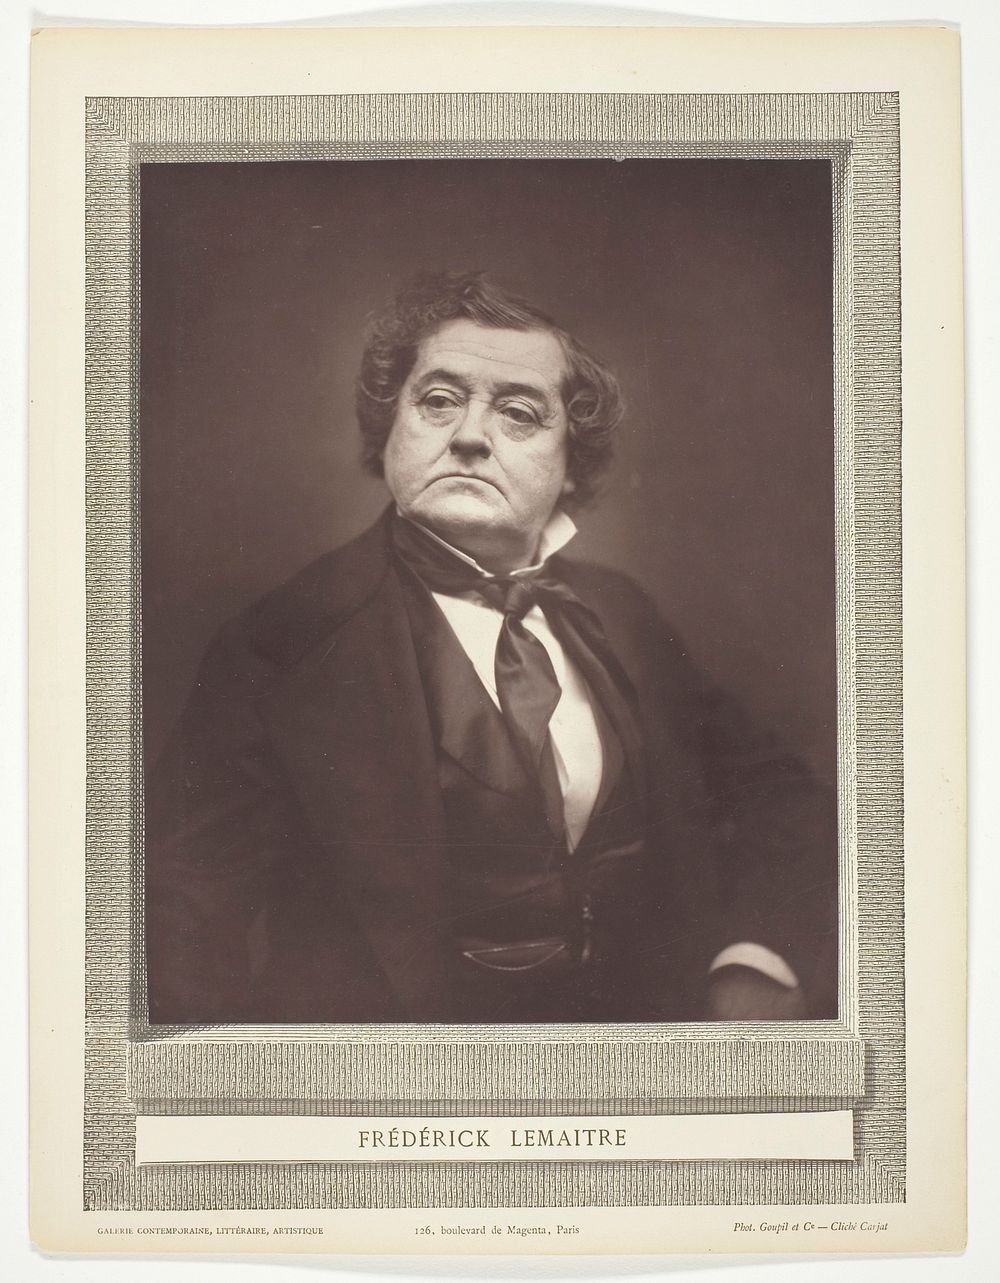 Fréderick Lamaître (French actor and playwright, 1800-1976) by Etienne Carjat